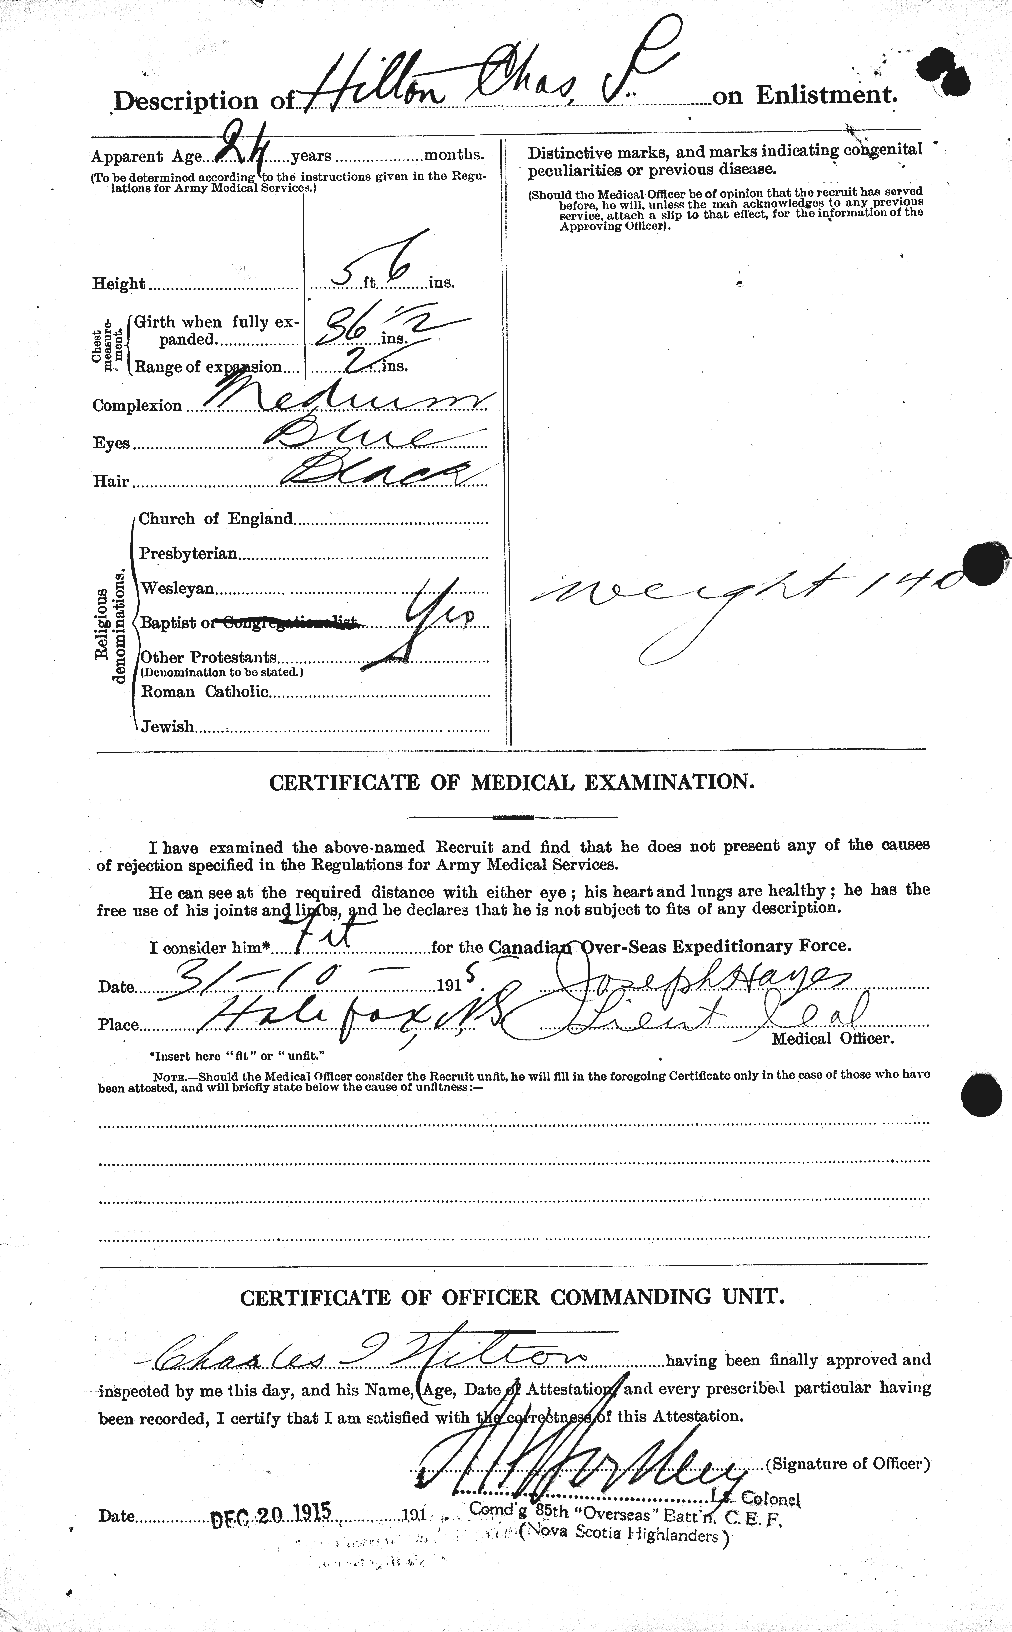 Personnel Records of the First World War - CEF 393213b